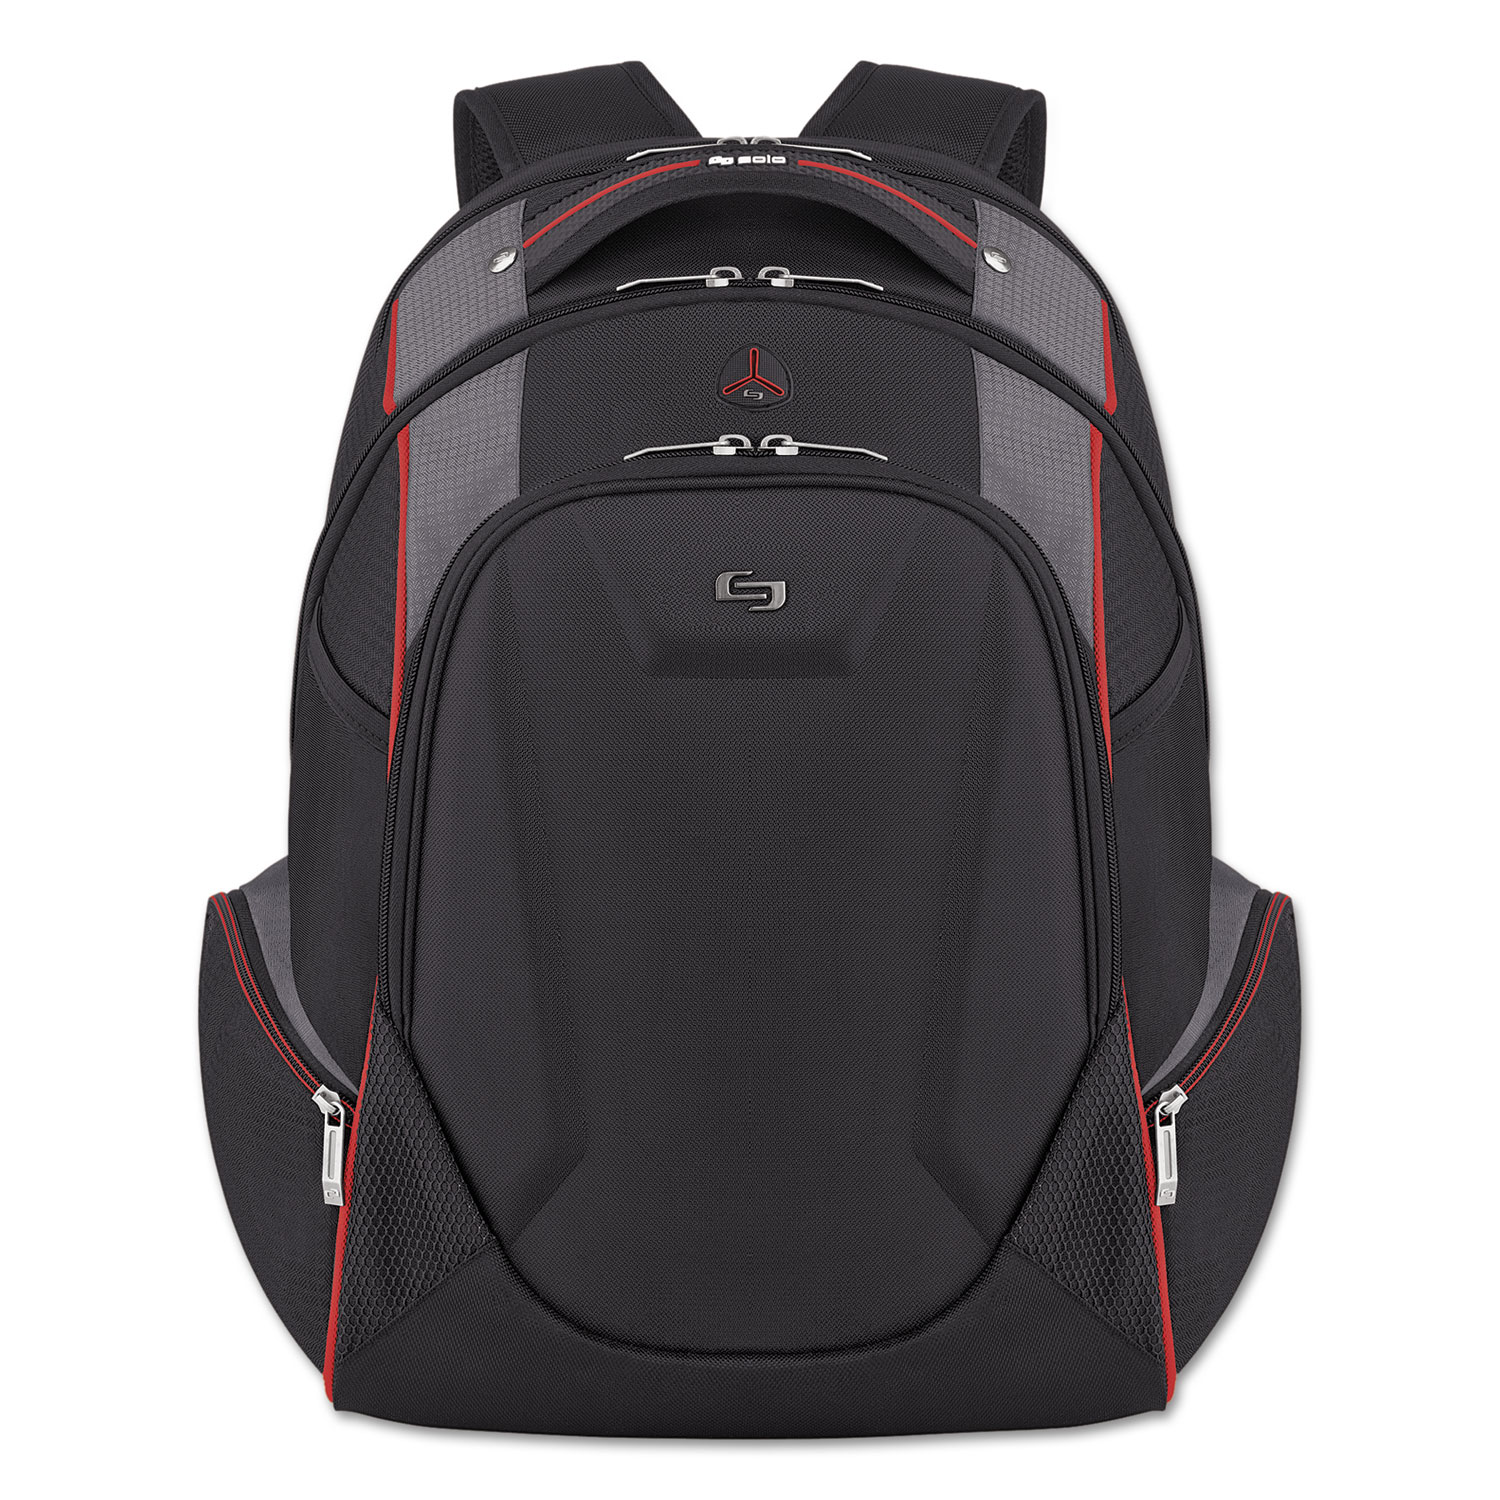 Launch Laptop Backpack, 17.3", 12 1/2 x 8 x 19 1/2, Black/Gray/Red